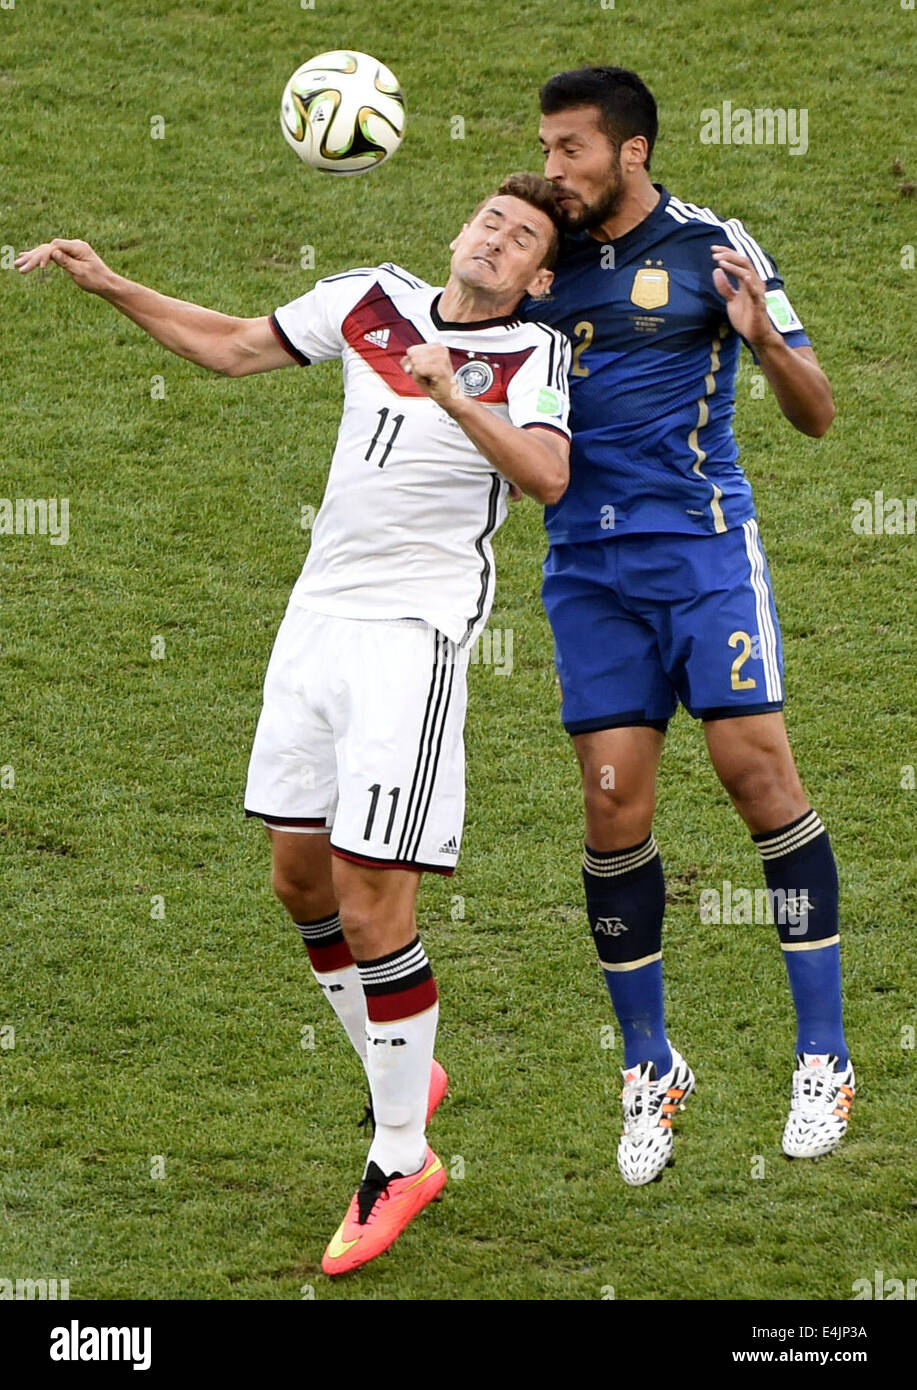 Rio De Janeiro, Brazil. 13th July, 2014. Germany's Miroslav Klose competes a header with Argentina's Ezequiel Garay during the final match between Germany and Argentina of 2014 FIFA World Cup at the Estadio do Maracana Stadium in Rio de Janeiro, Brazil, on July 13, 2014. Credit:  Lui Siu Wai/Xinhua/Alamy Live News Stock Photo